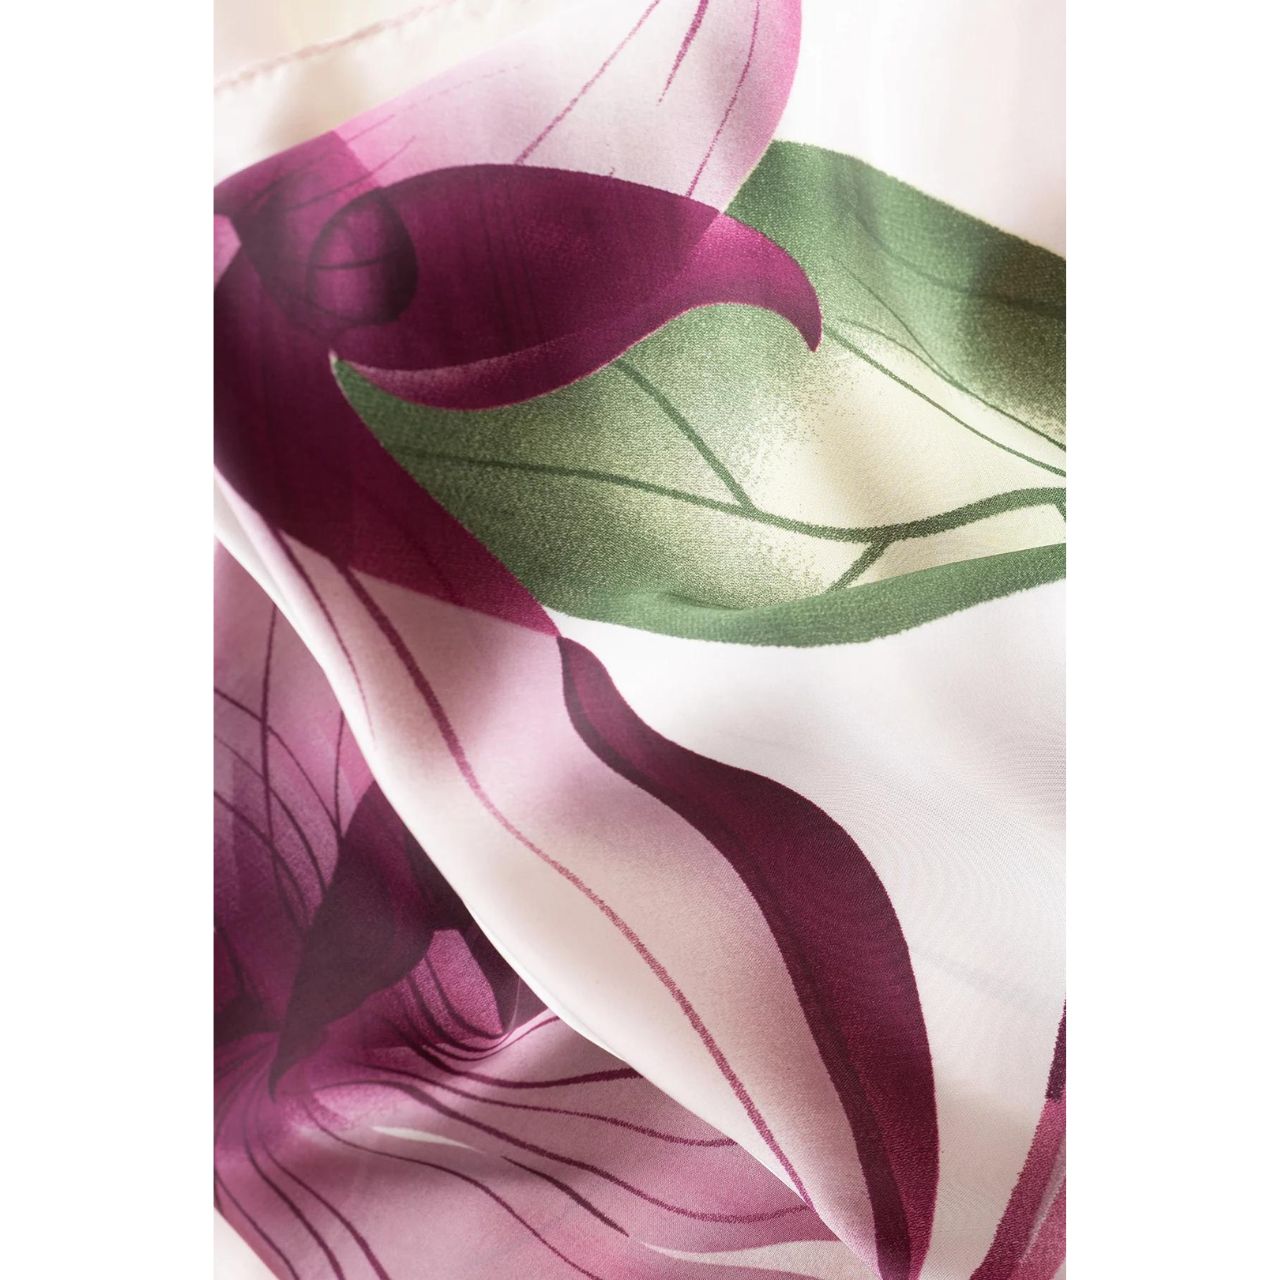 Mulberry Blossom Polyester Scarf  ﻿Our Mulberry Blossom Polyester Scarf is the perfect rich colour that will draw attention and complement any outfit. This rich, soft and comfortable scarf is a must have and also comes in a beautiful box ready for gifting. A touch of luxury for everyday life and perfect for all seasons.